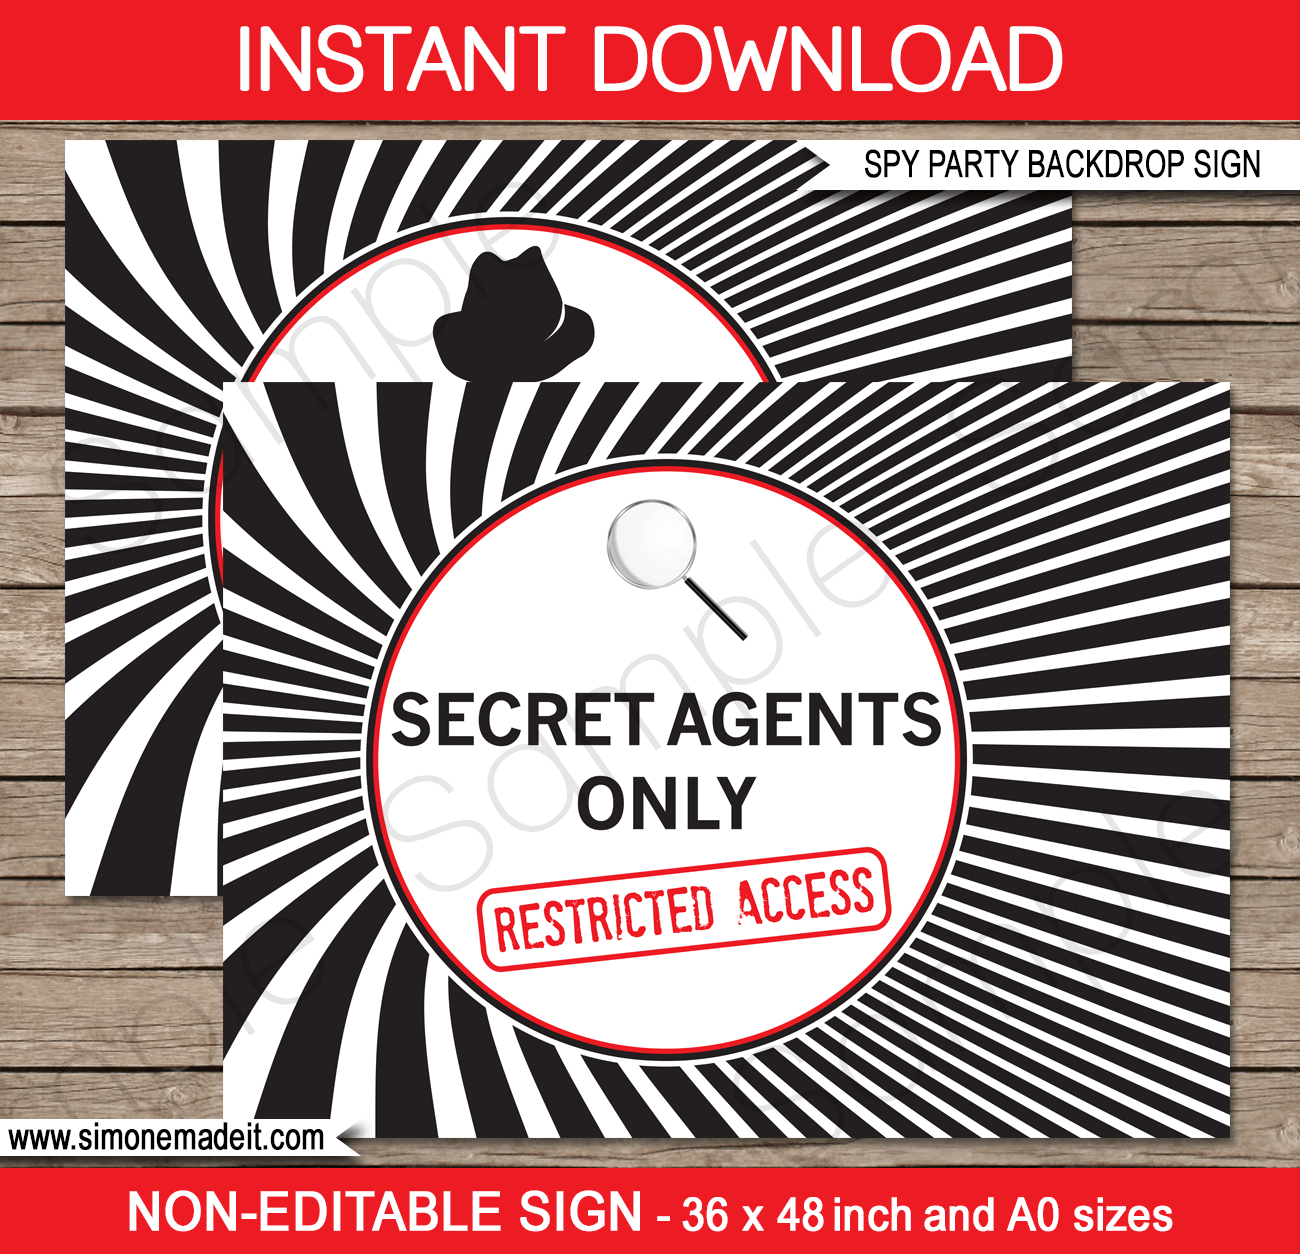 Spy Party Backdrop Sign | Secret Agents Only - Restricted Access | Printable DIY Template | Party Decorations | $4.50 Instant Download via SIMONEmadeit.com